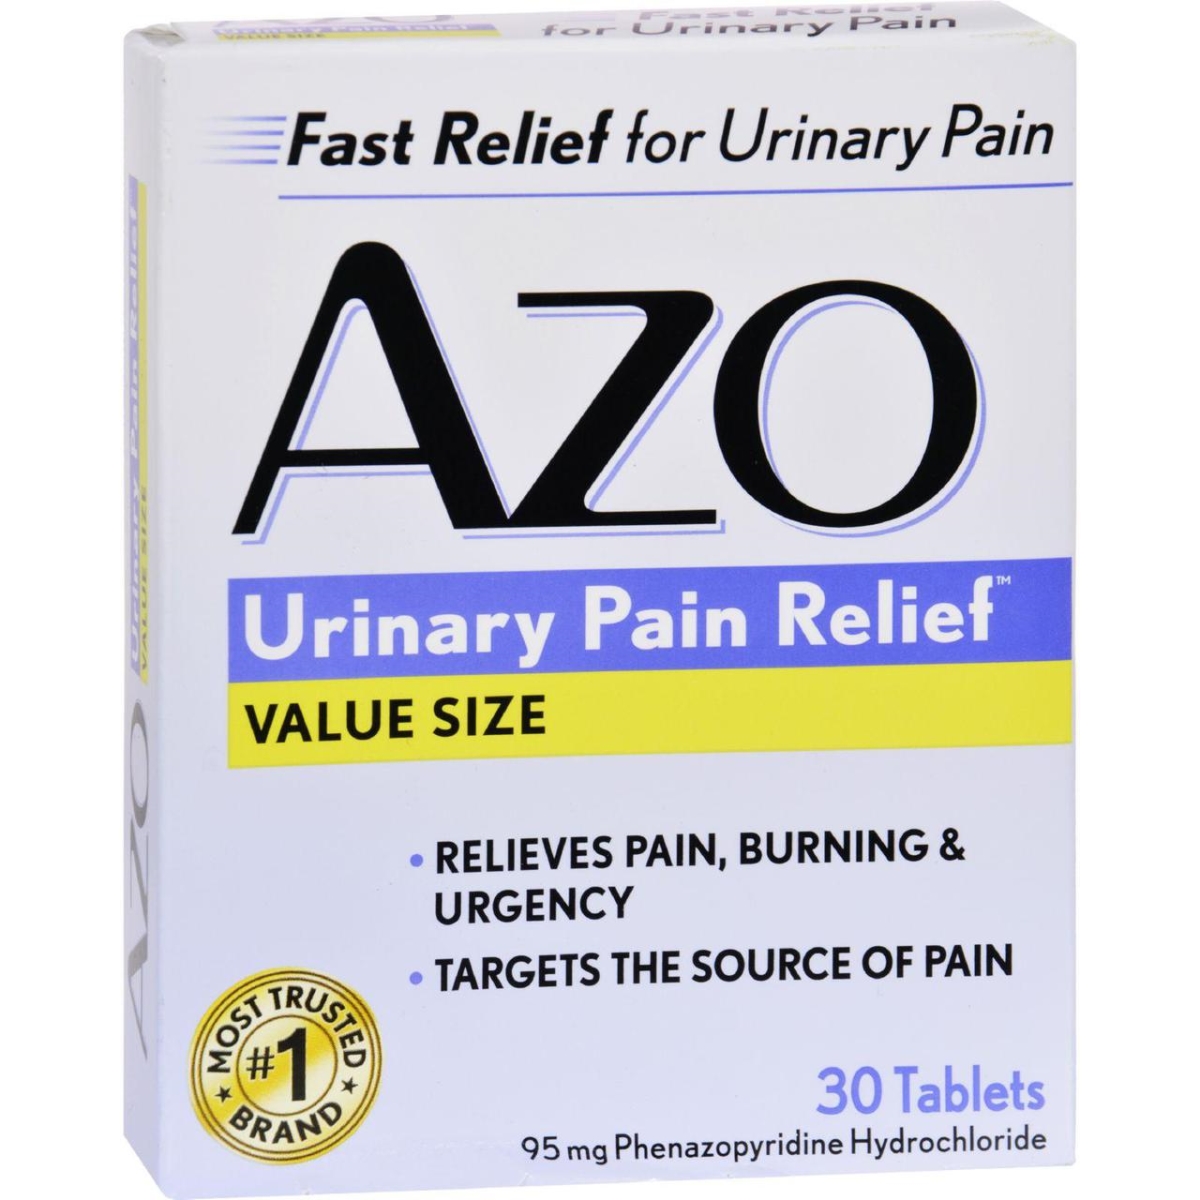 Hg0810036 Standard Urinary Pain Relief - 30 Tablets